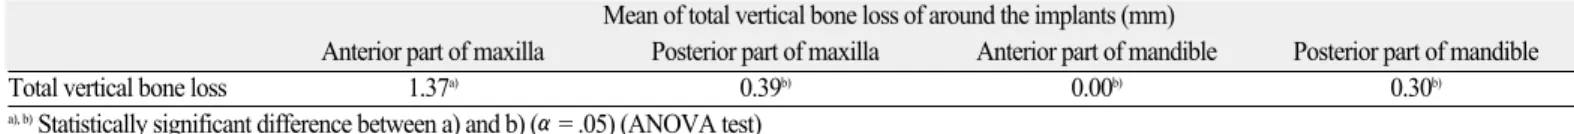 Table 5. Vertical bone loss of around the implants classified by location of implant